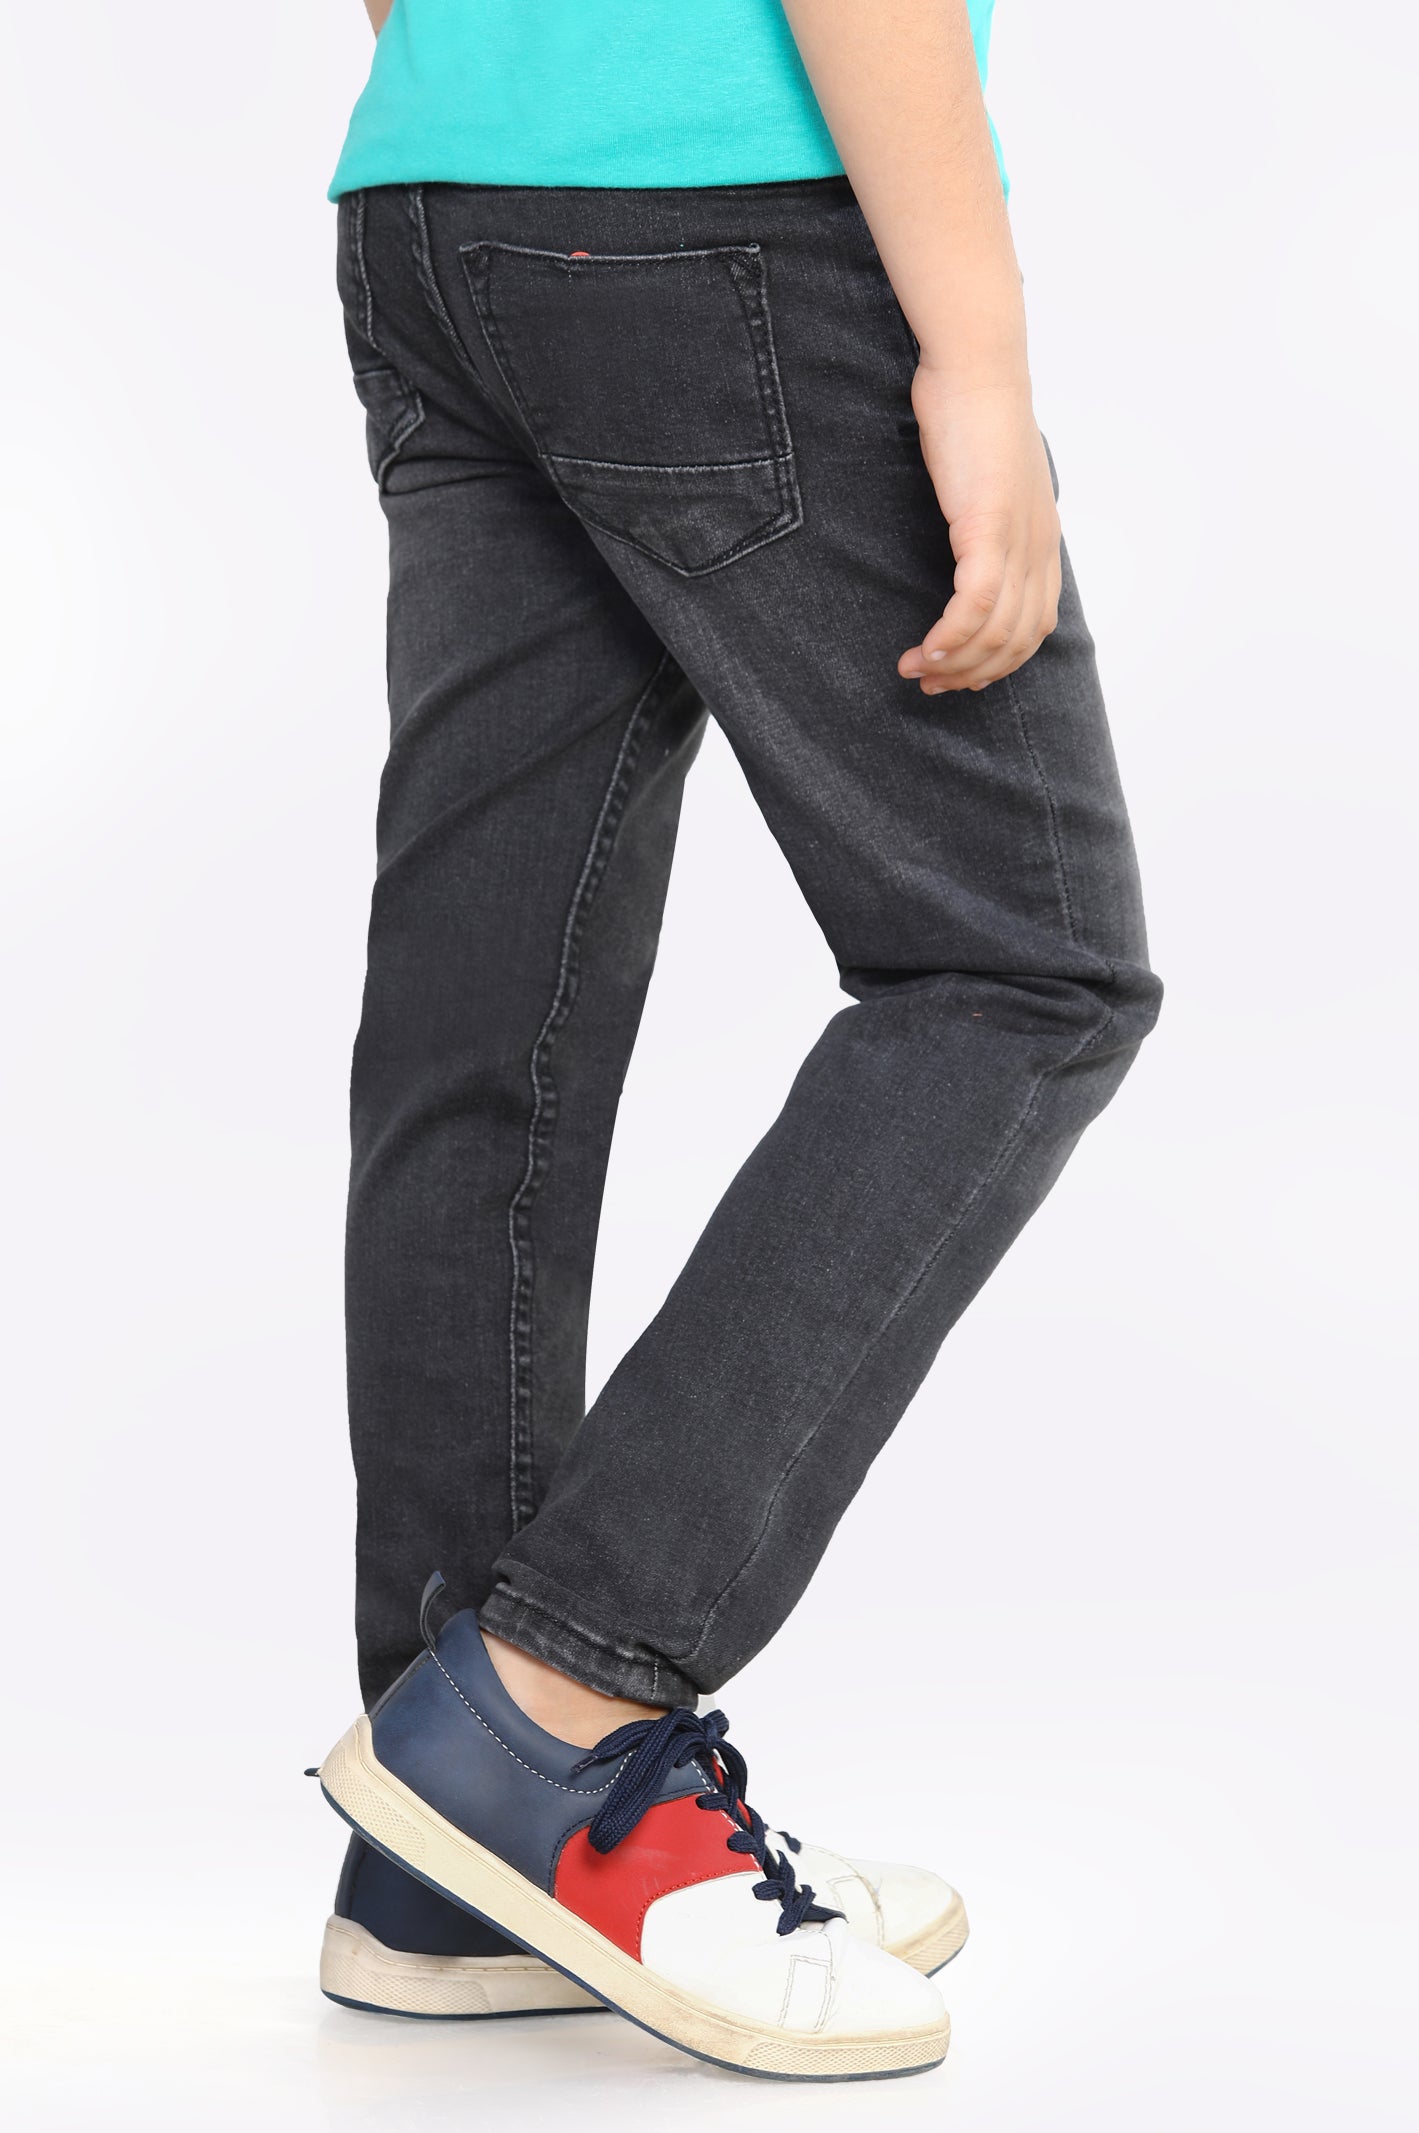 Grey Slim Fit Denim Jeans From Diners